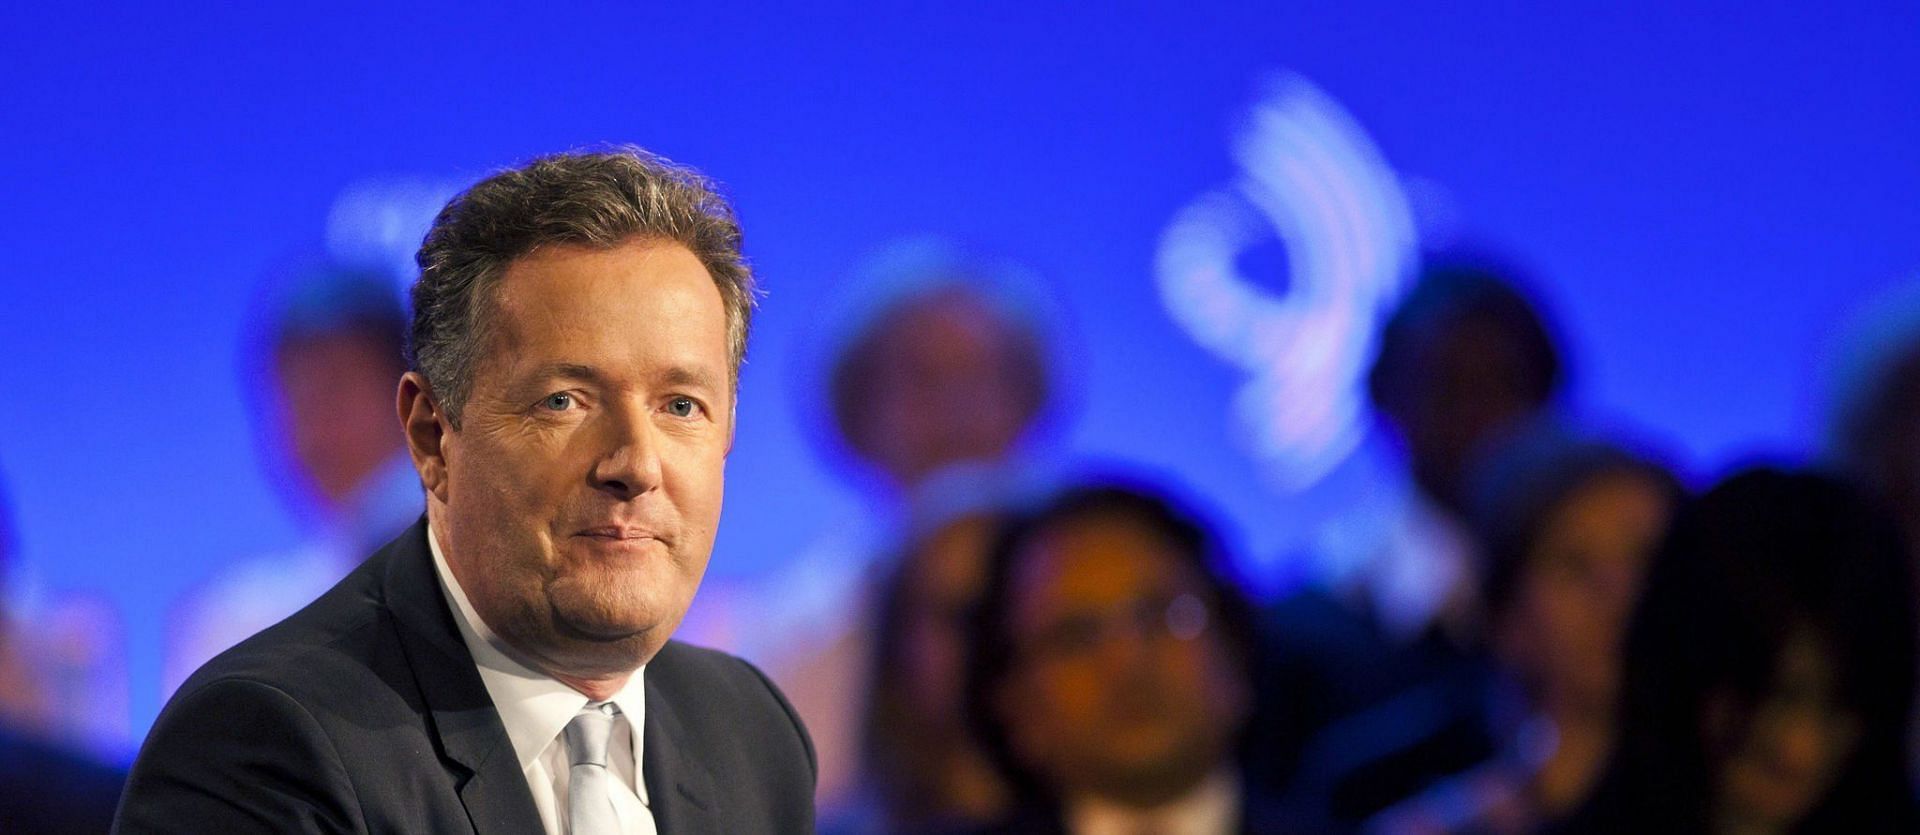 Piers Morgan alleged Donald Trump walked off set during a talk TV interview (Image via Ramin Talaie/Getty Images)